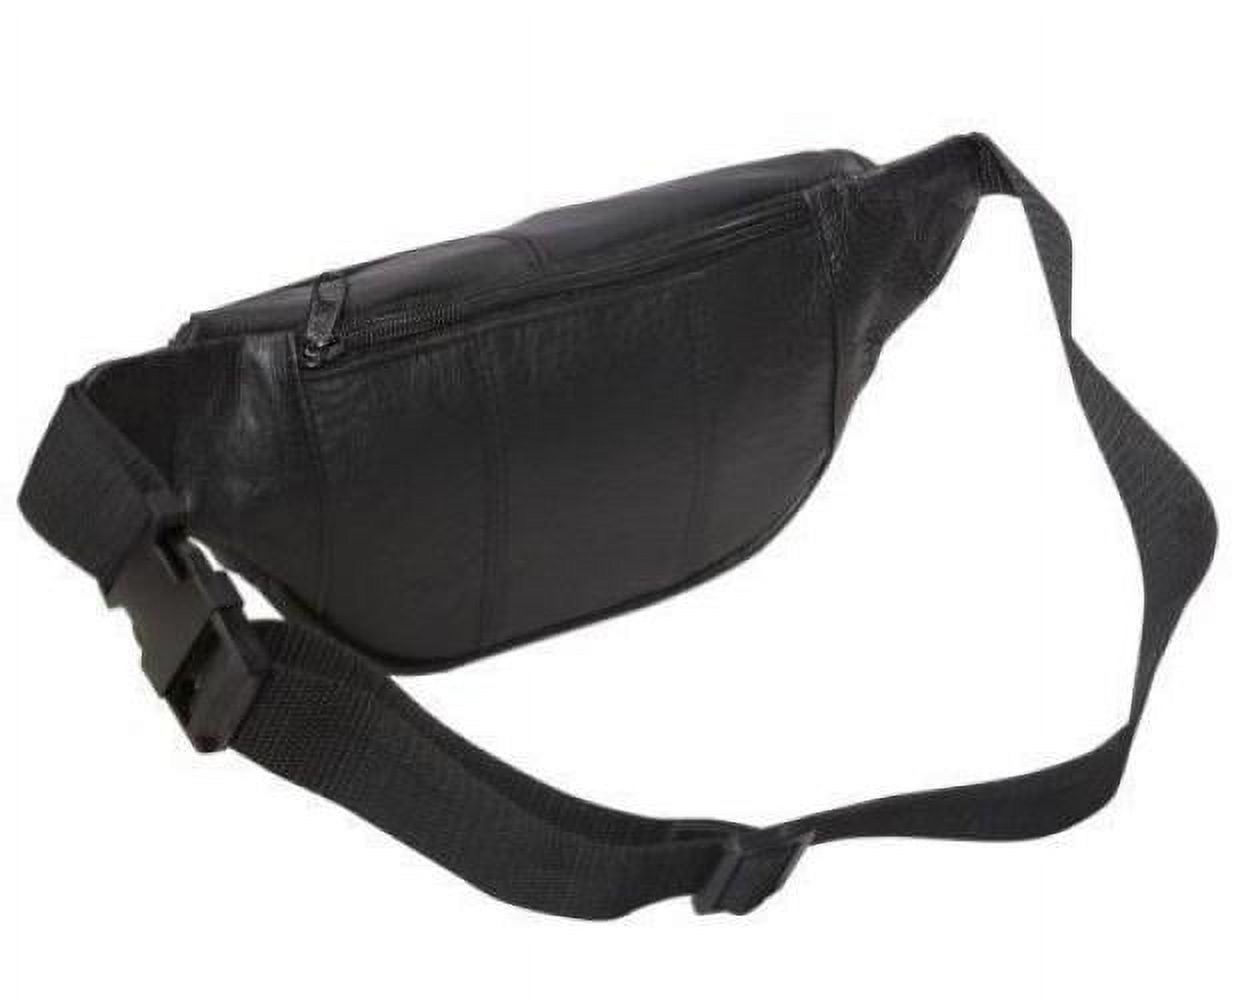 AmeriLeather Top-grain Cowhide Leather Fanny Pack with 40-inch Belt - image 2 of 4